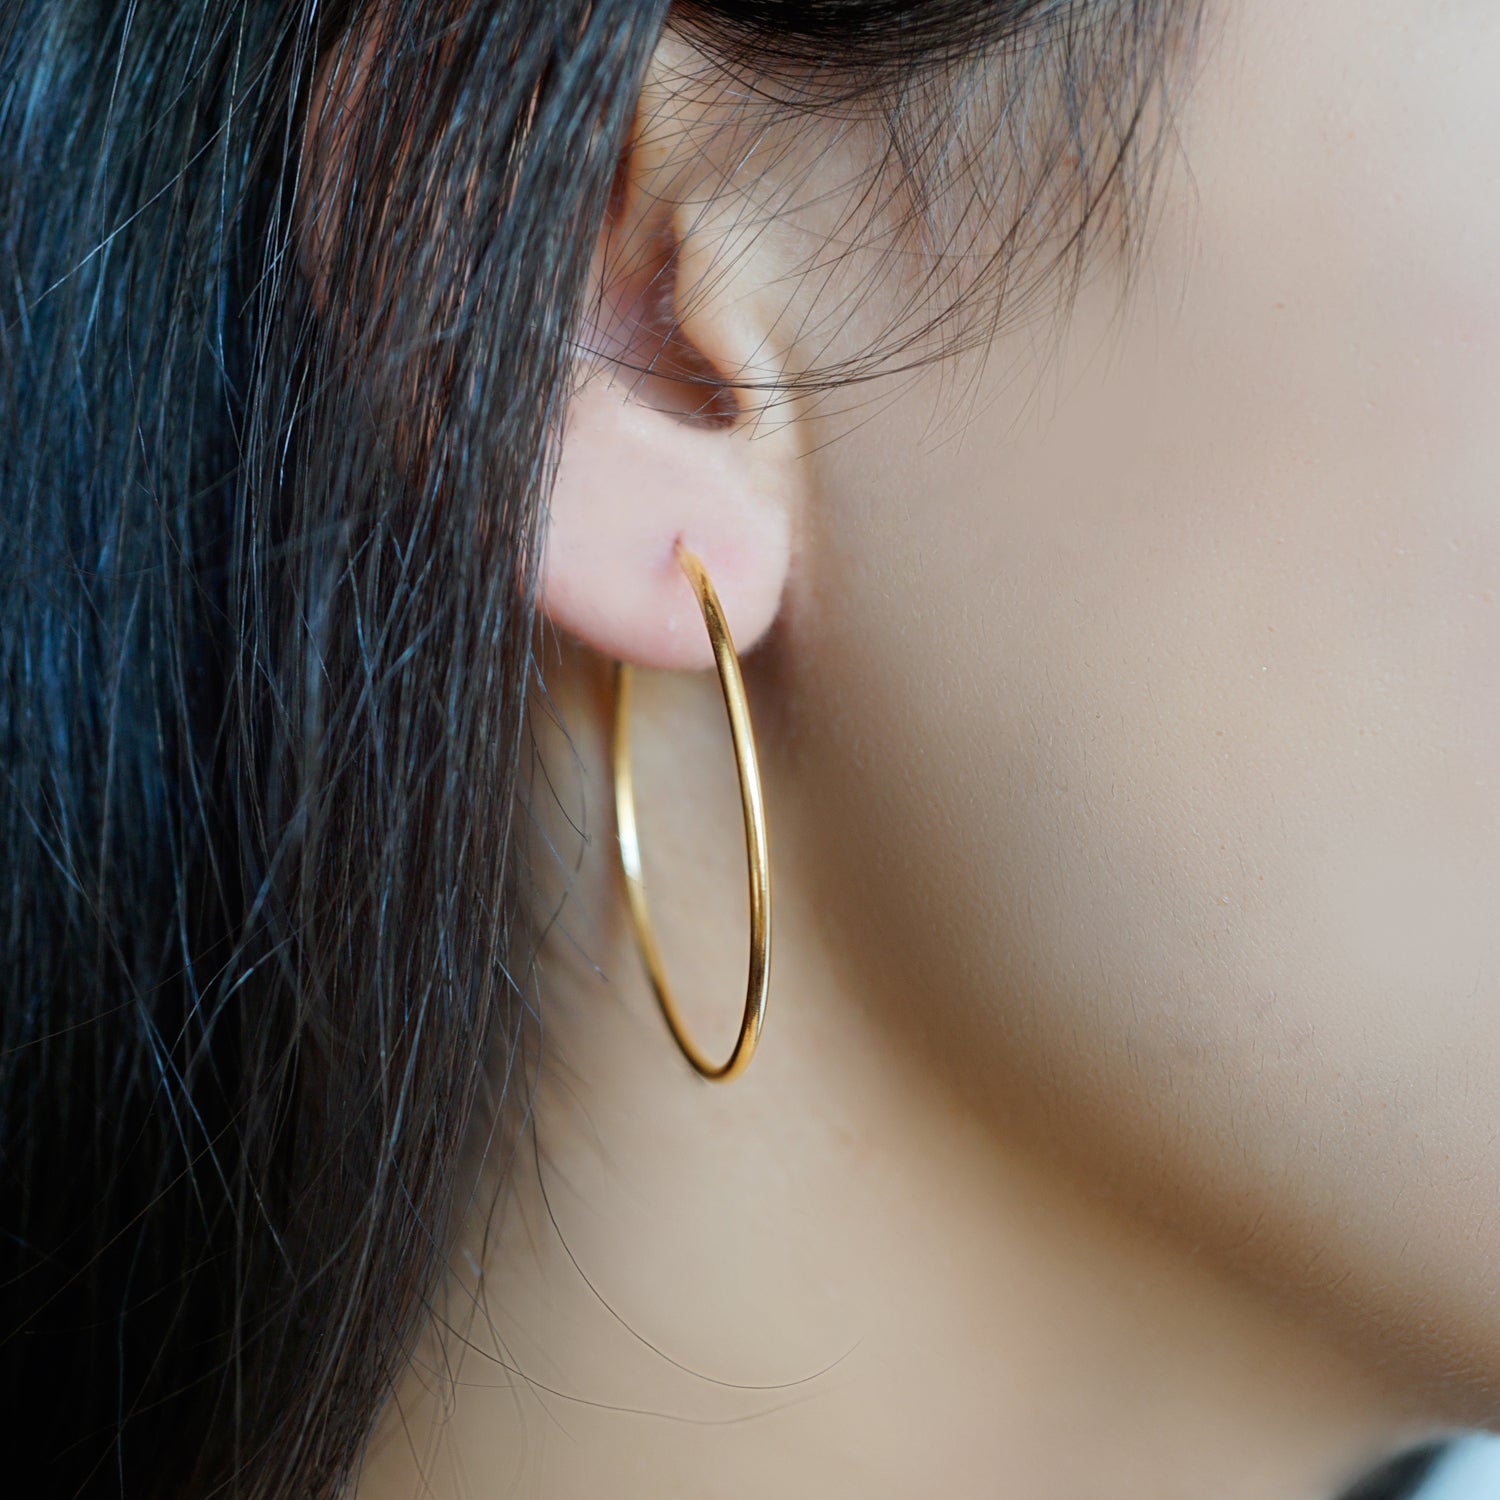 Forever favorite - Endless Hoop Earrings (pictured here in size 2.5”). I  personally hand shape, hammer and polish each hoop earring. 🔨 | Instagram